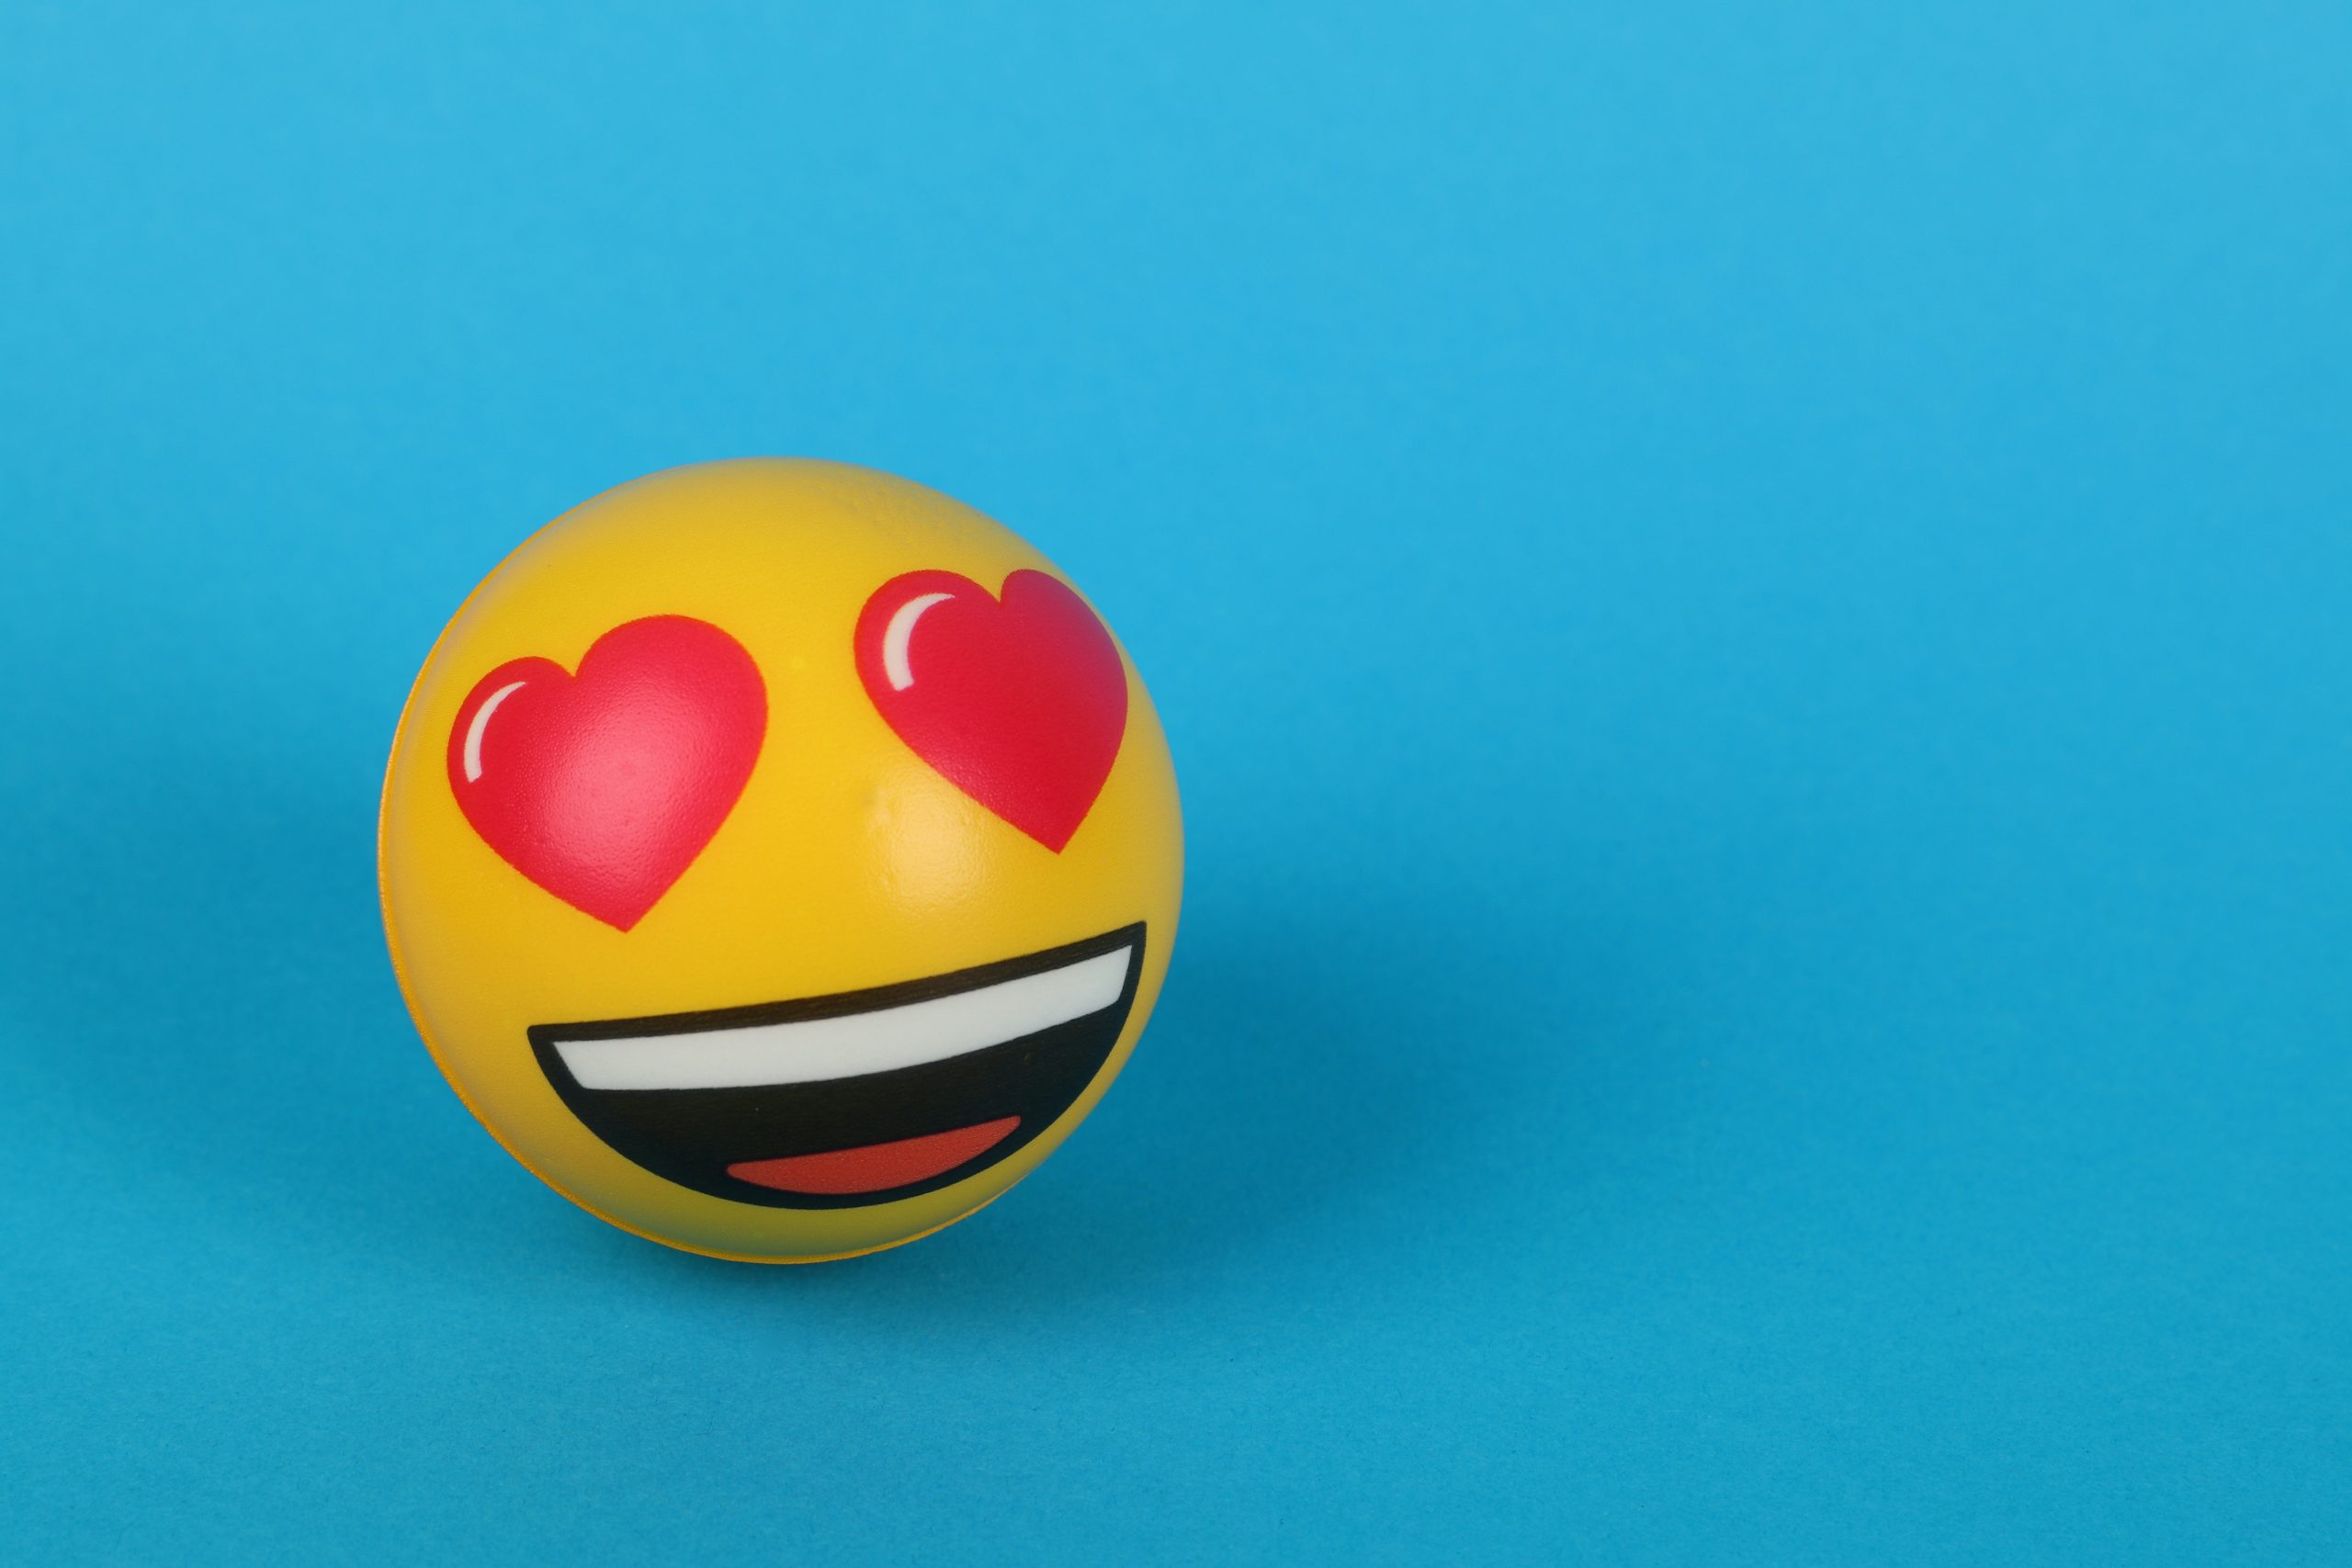 Add emoji to your social media profiles with simple Copy & Paste